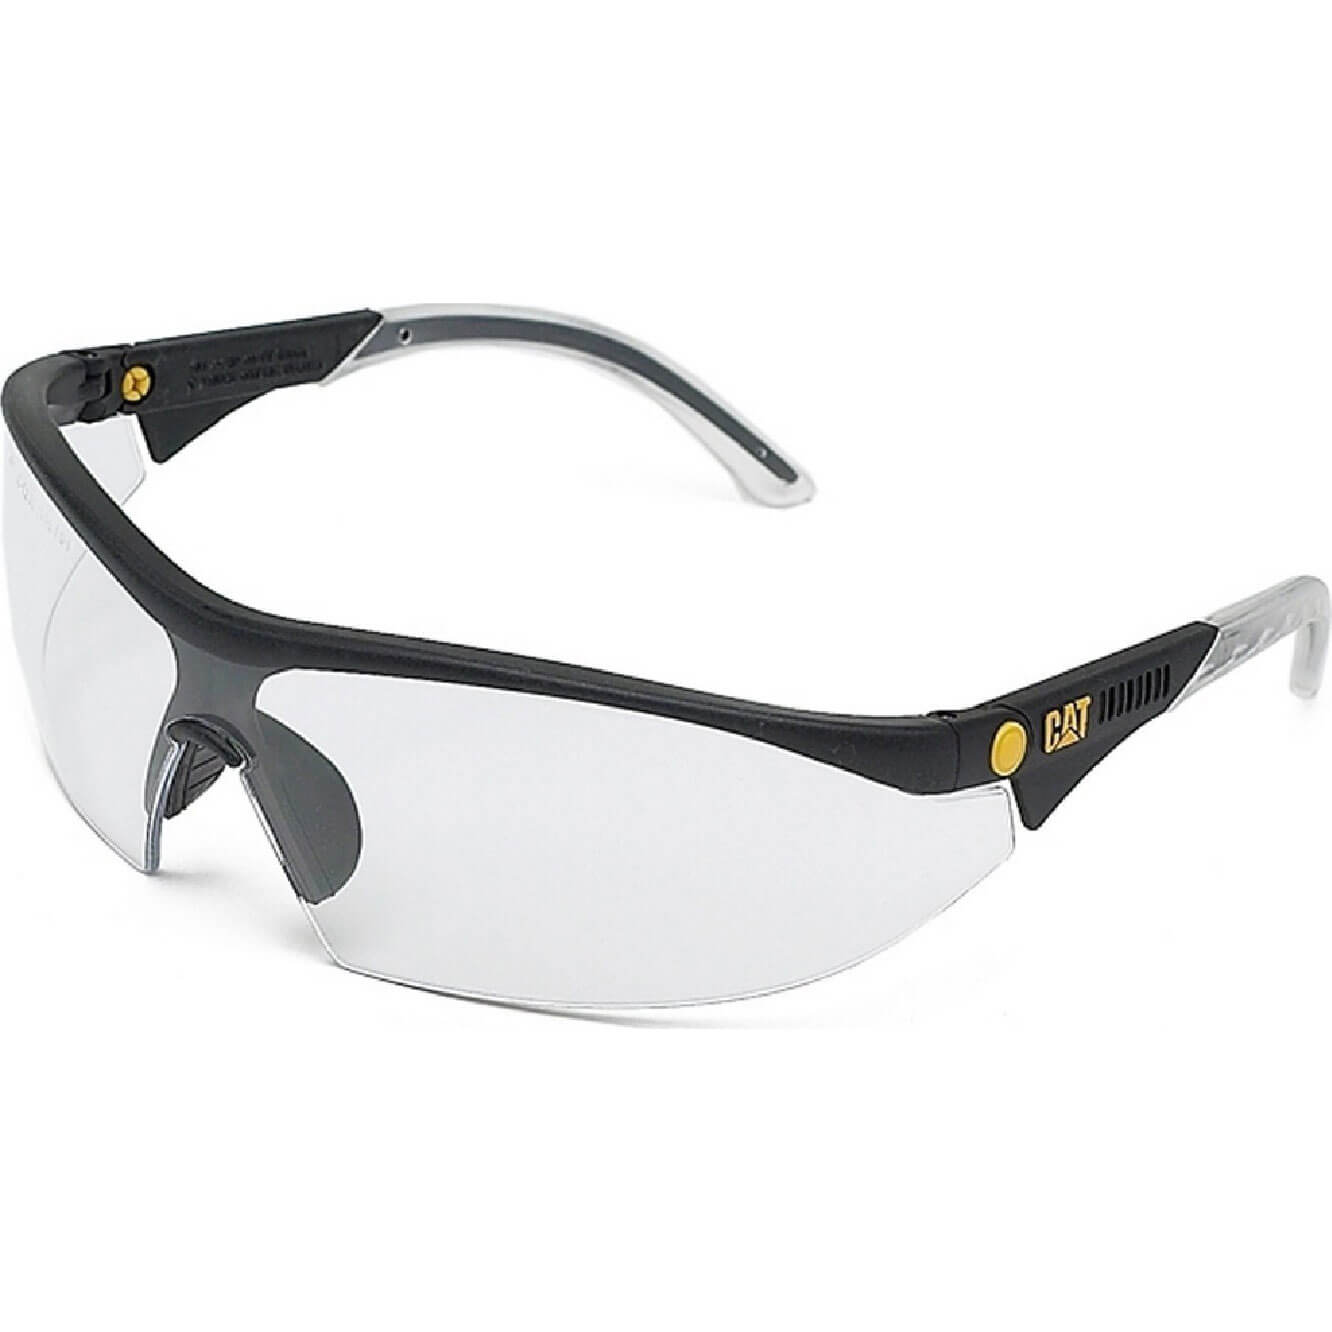 Image of Caterpillar Digger Protective Safety Glasses Clear